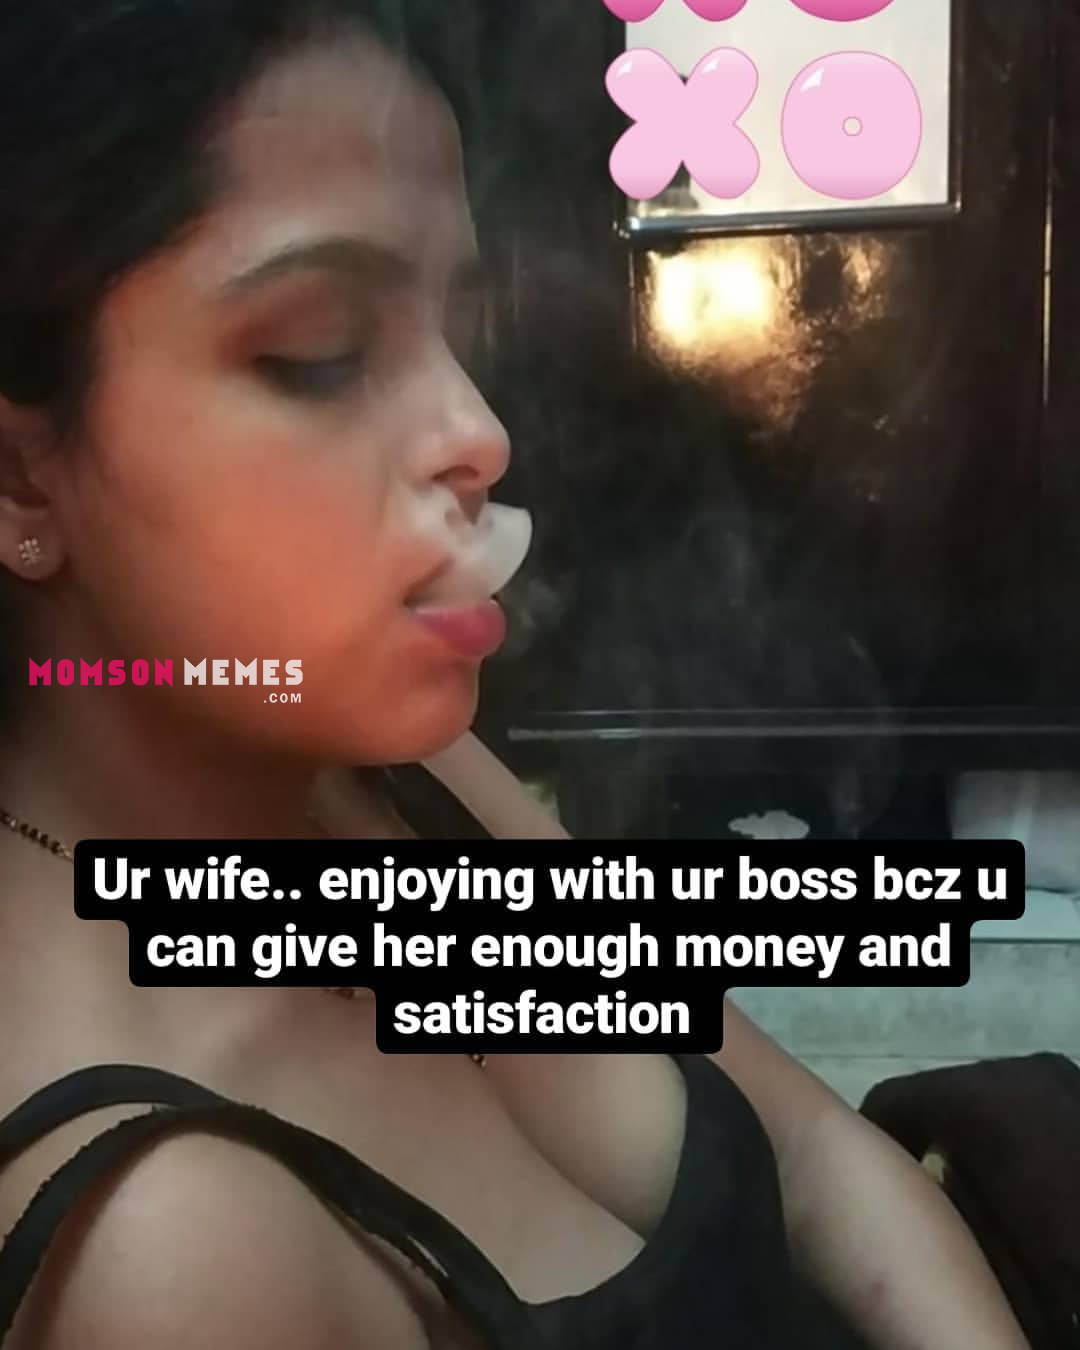 Wife enjoying with your boss!